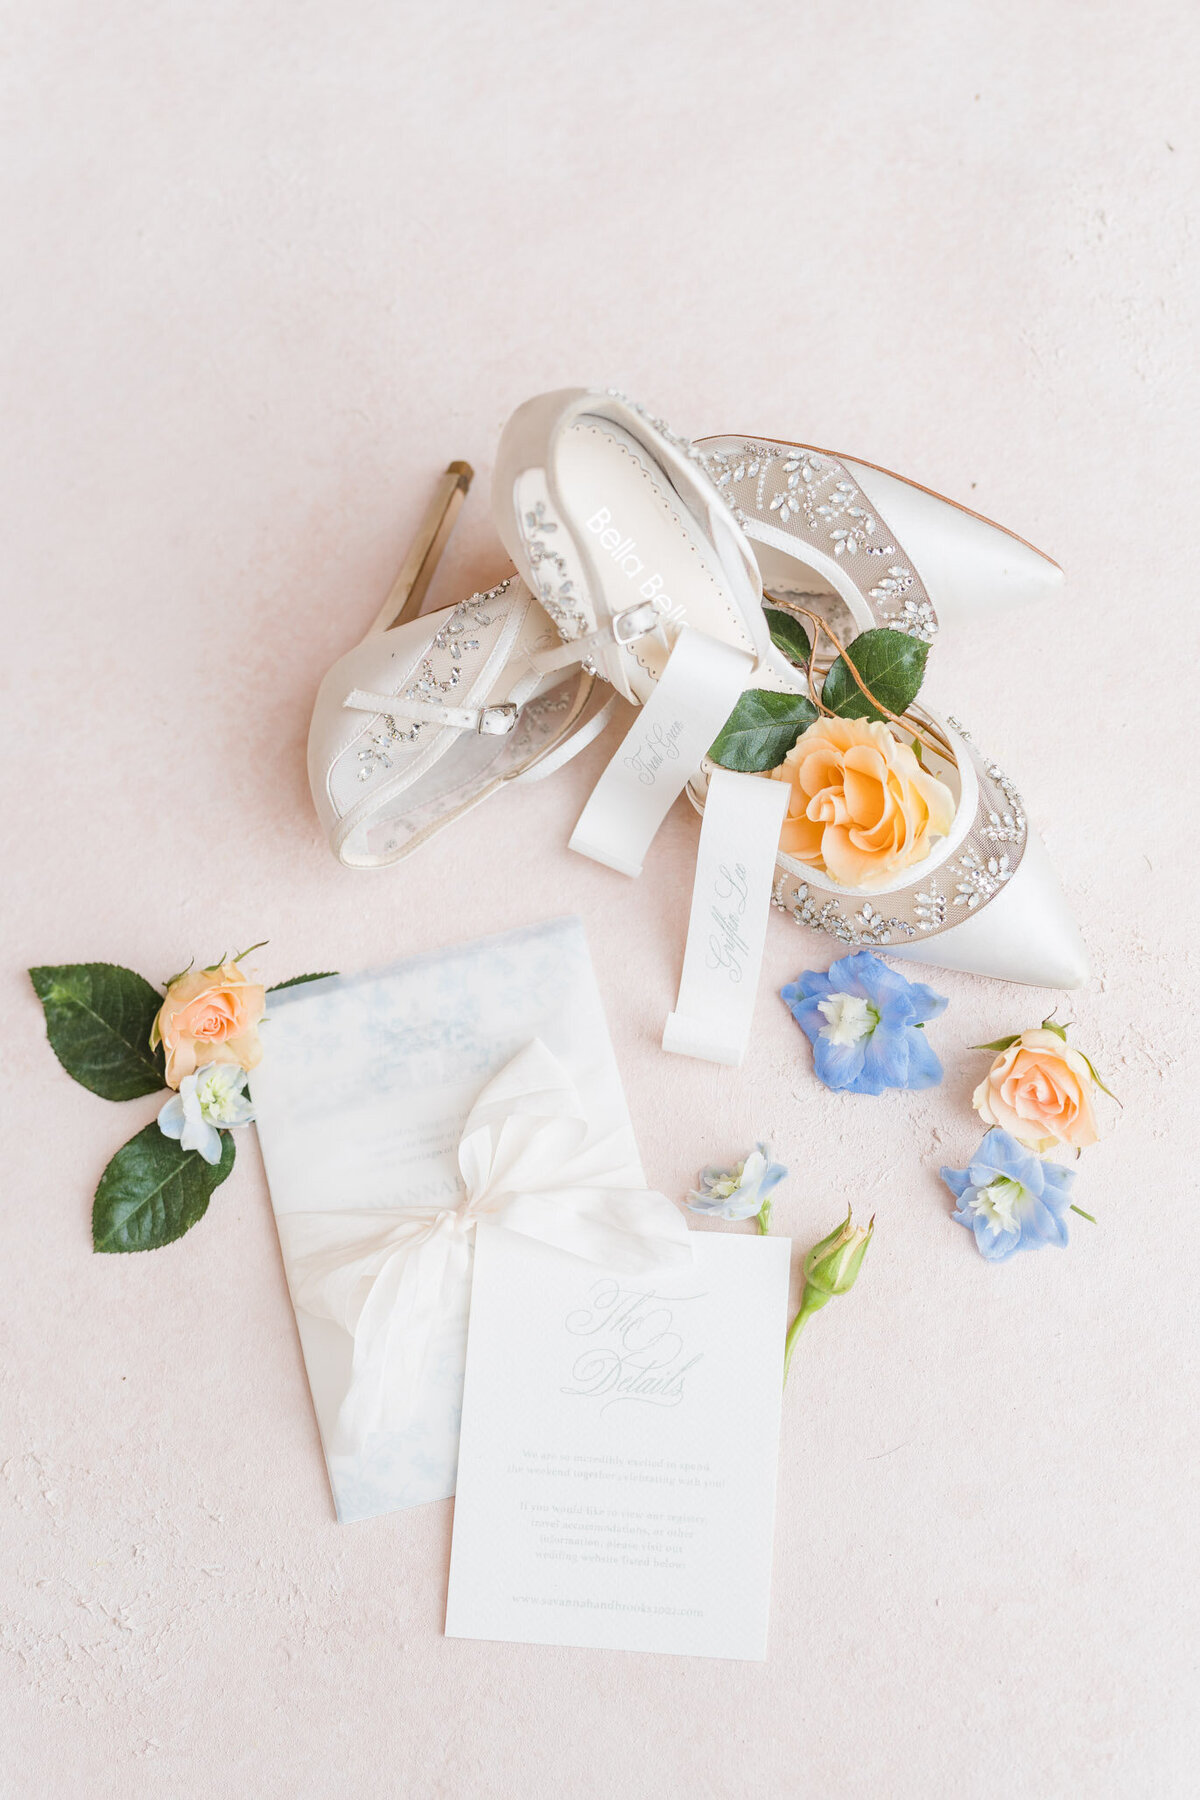 Detail photo of invitation suite and brides shoes